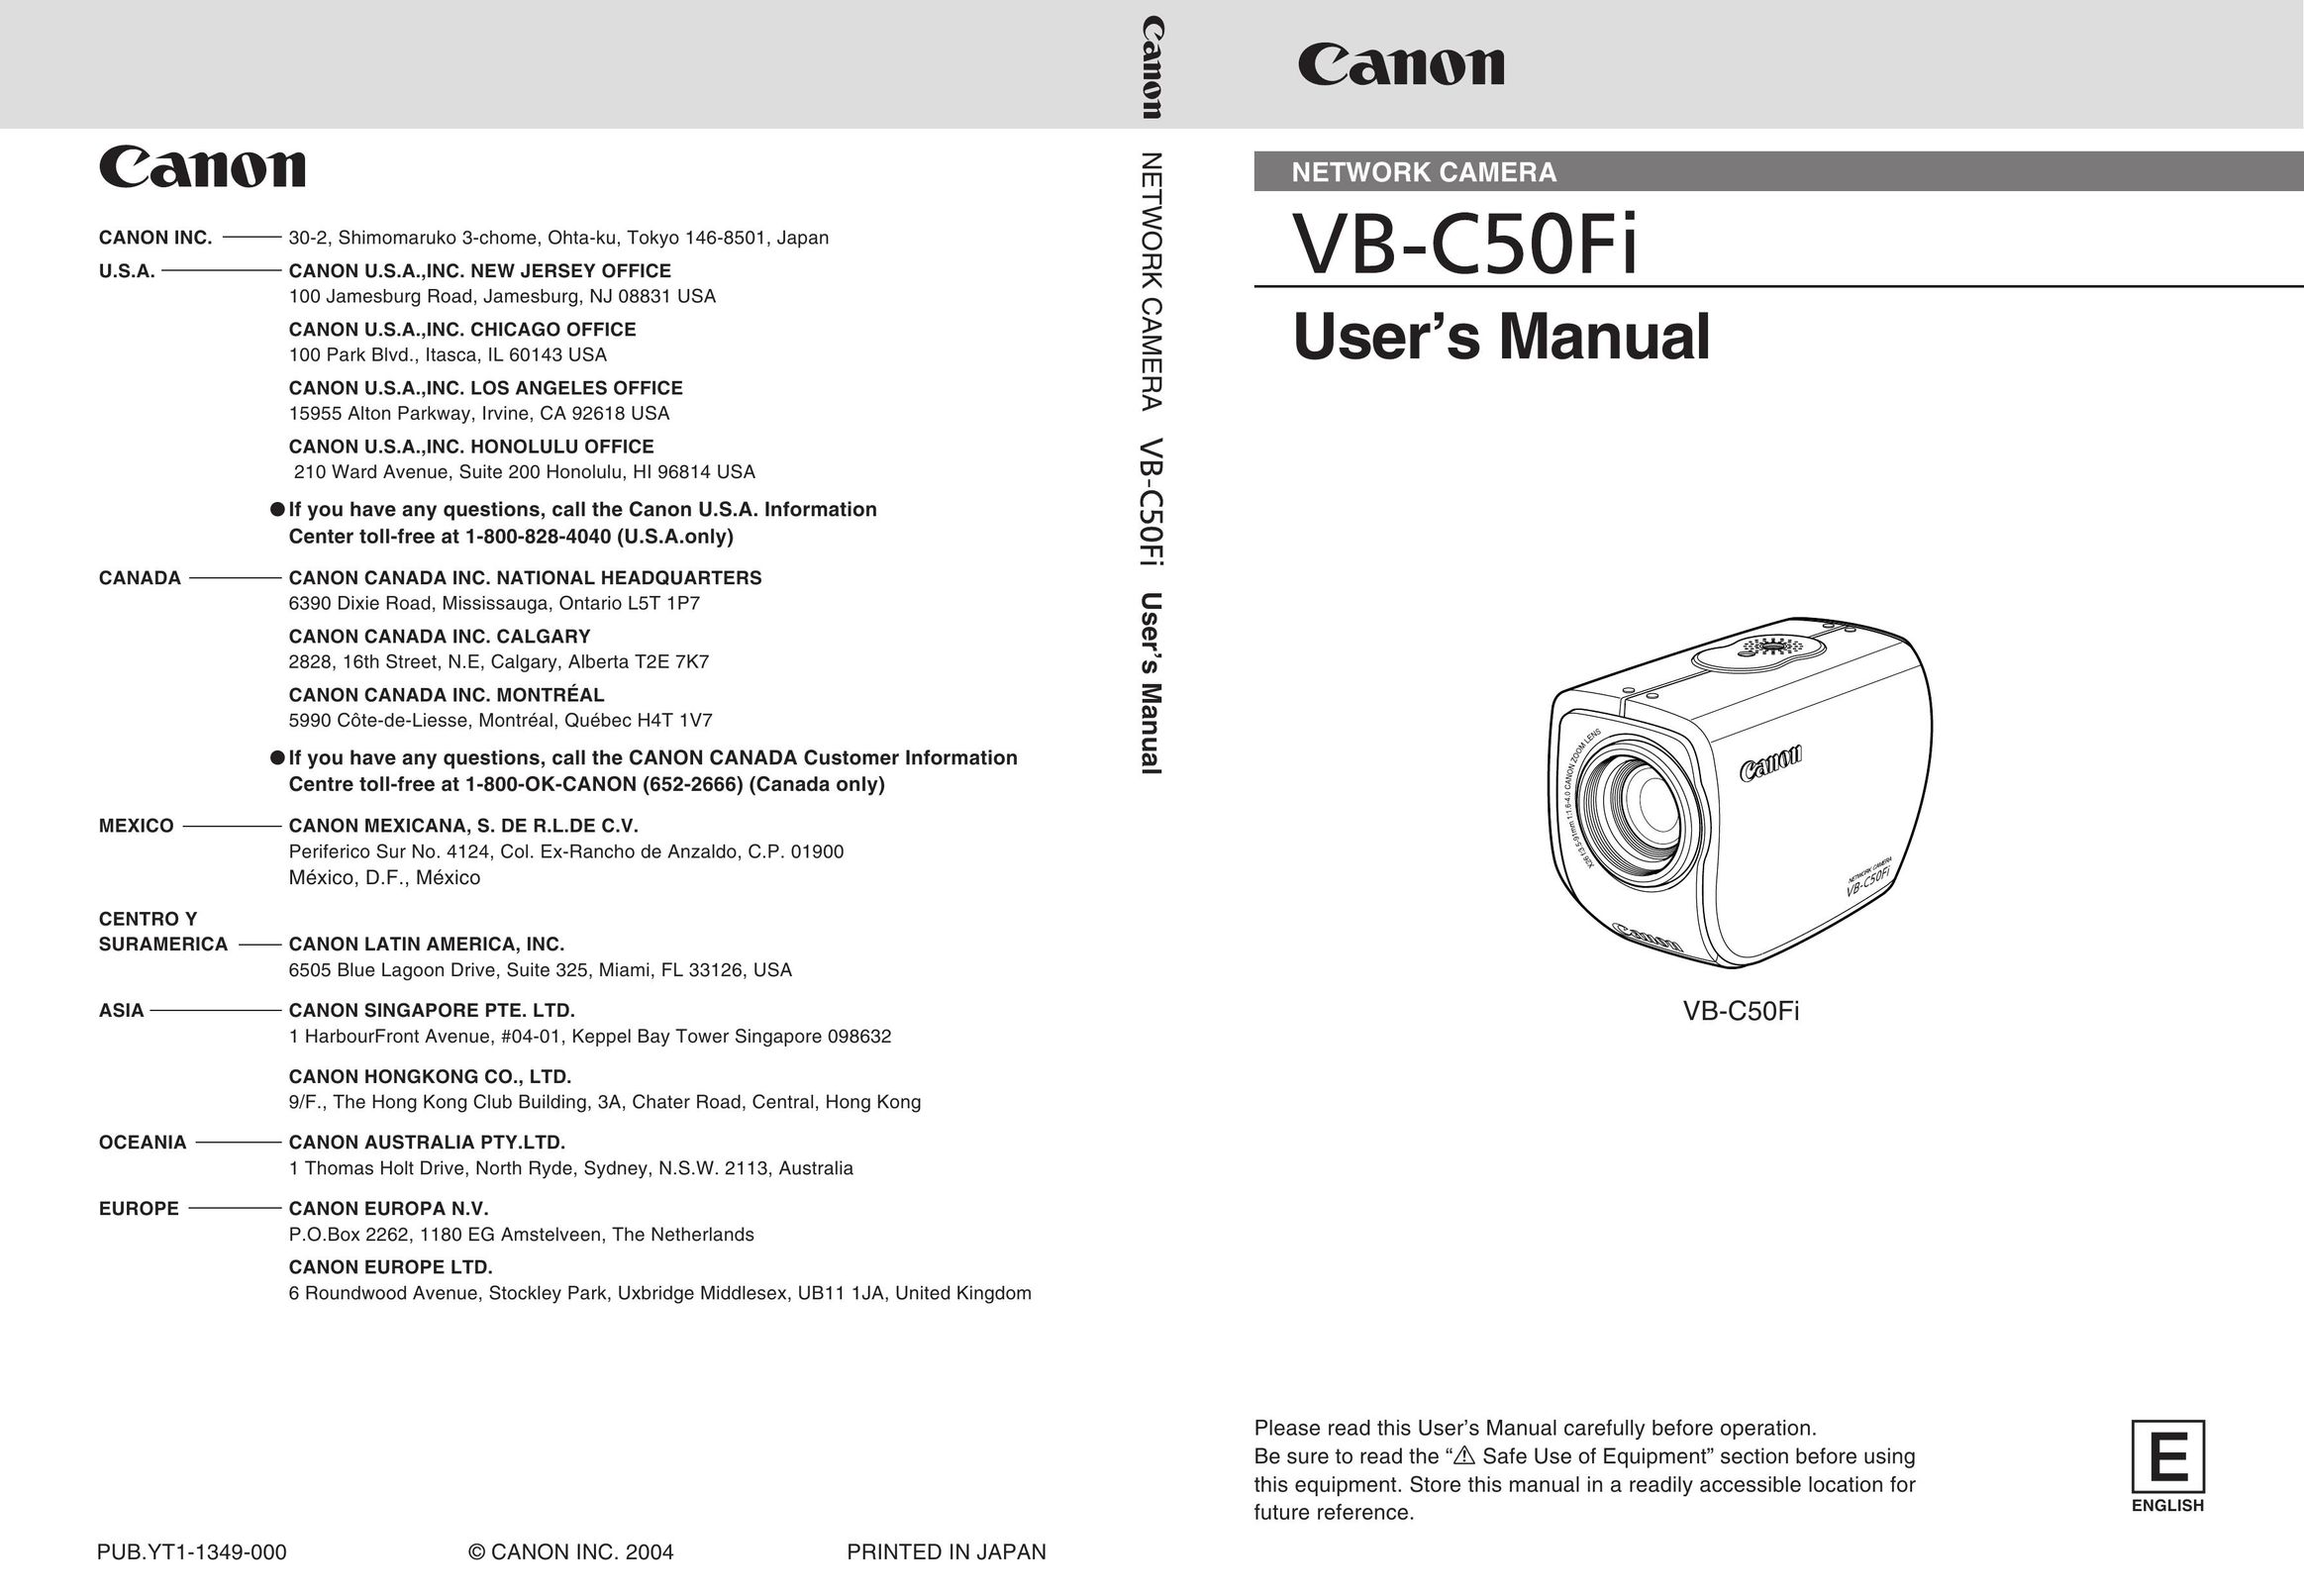 Canon Vb-C50fi Home Security System User Manual